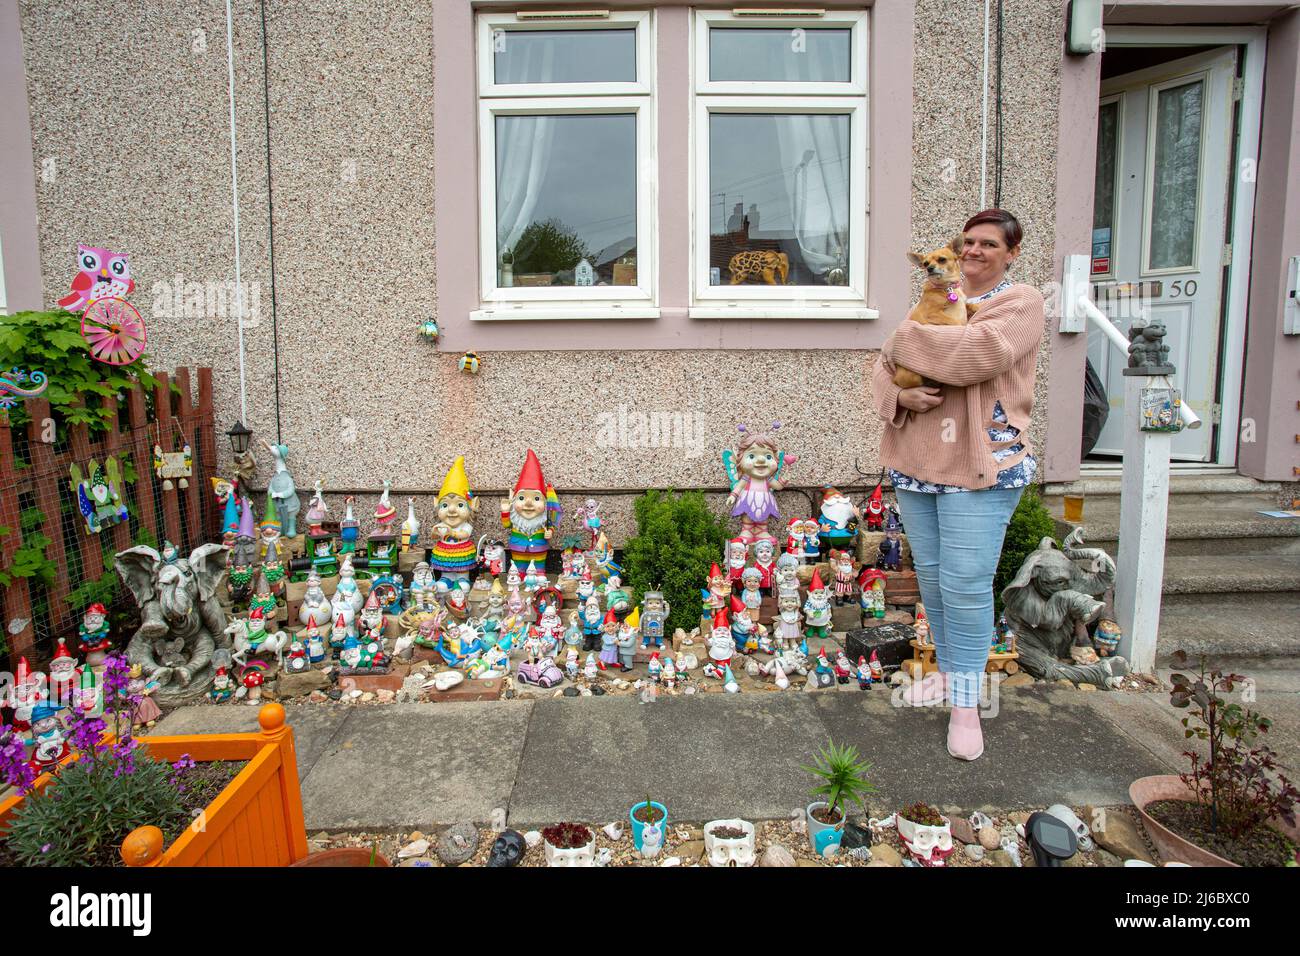 Nicola with her dog posing in front of her collection of garden gnomes outside a terraced house,  in Lupset, Wakefield, West Yorkshire, England. Stock Photo